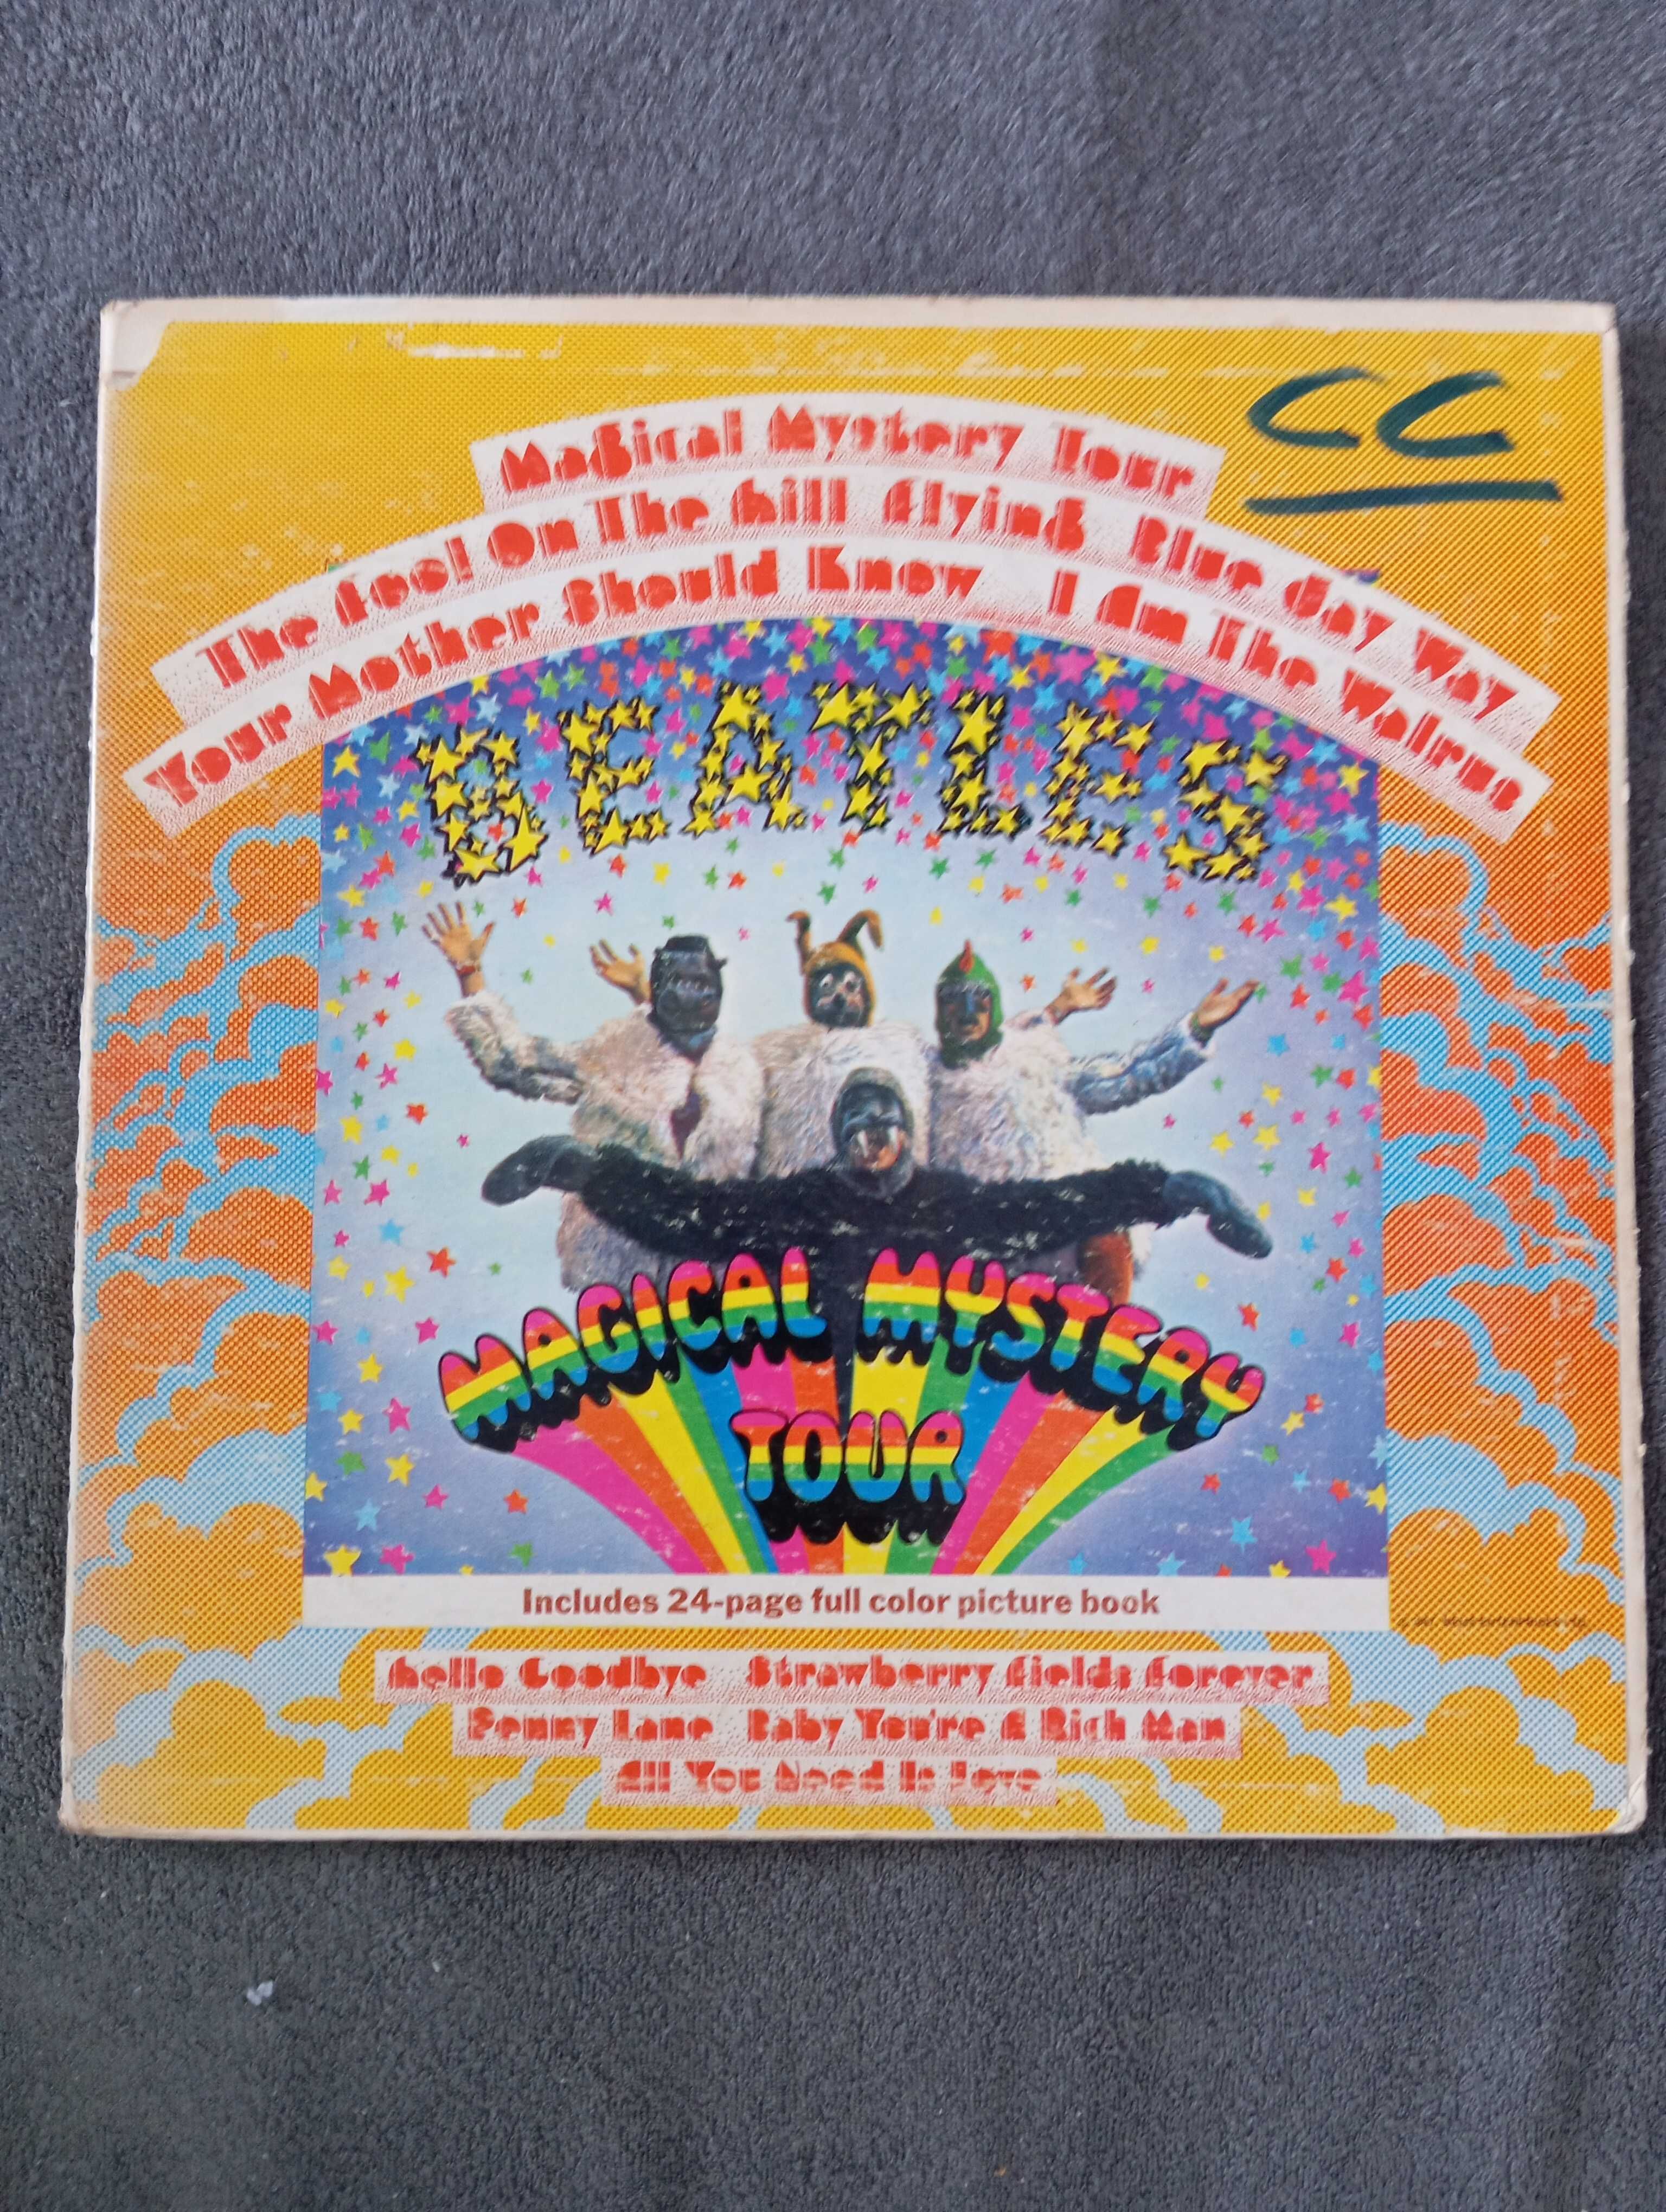 The Beatles – Magical Mystery Tour 1 press us